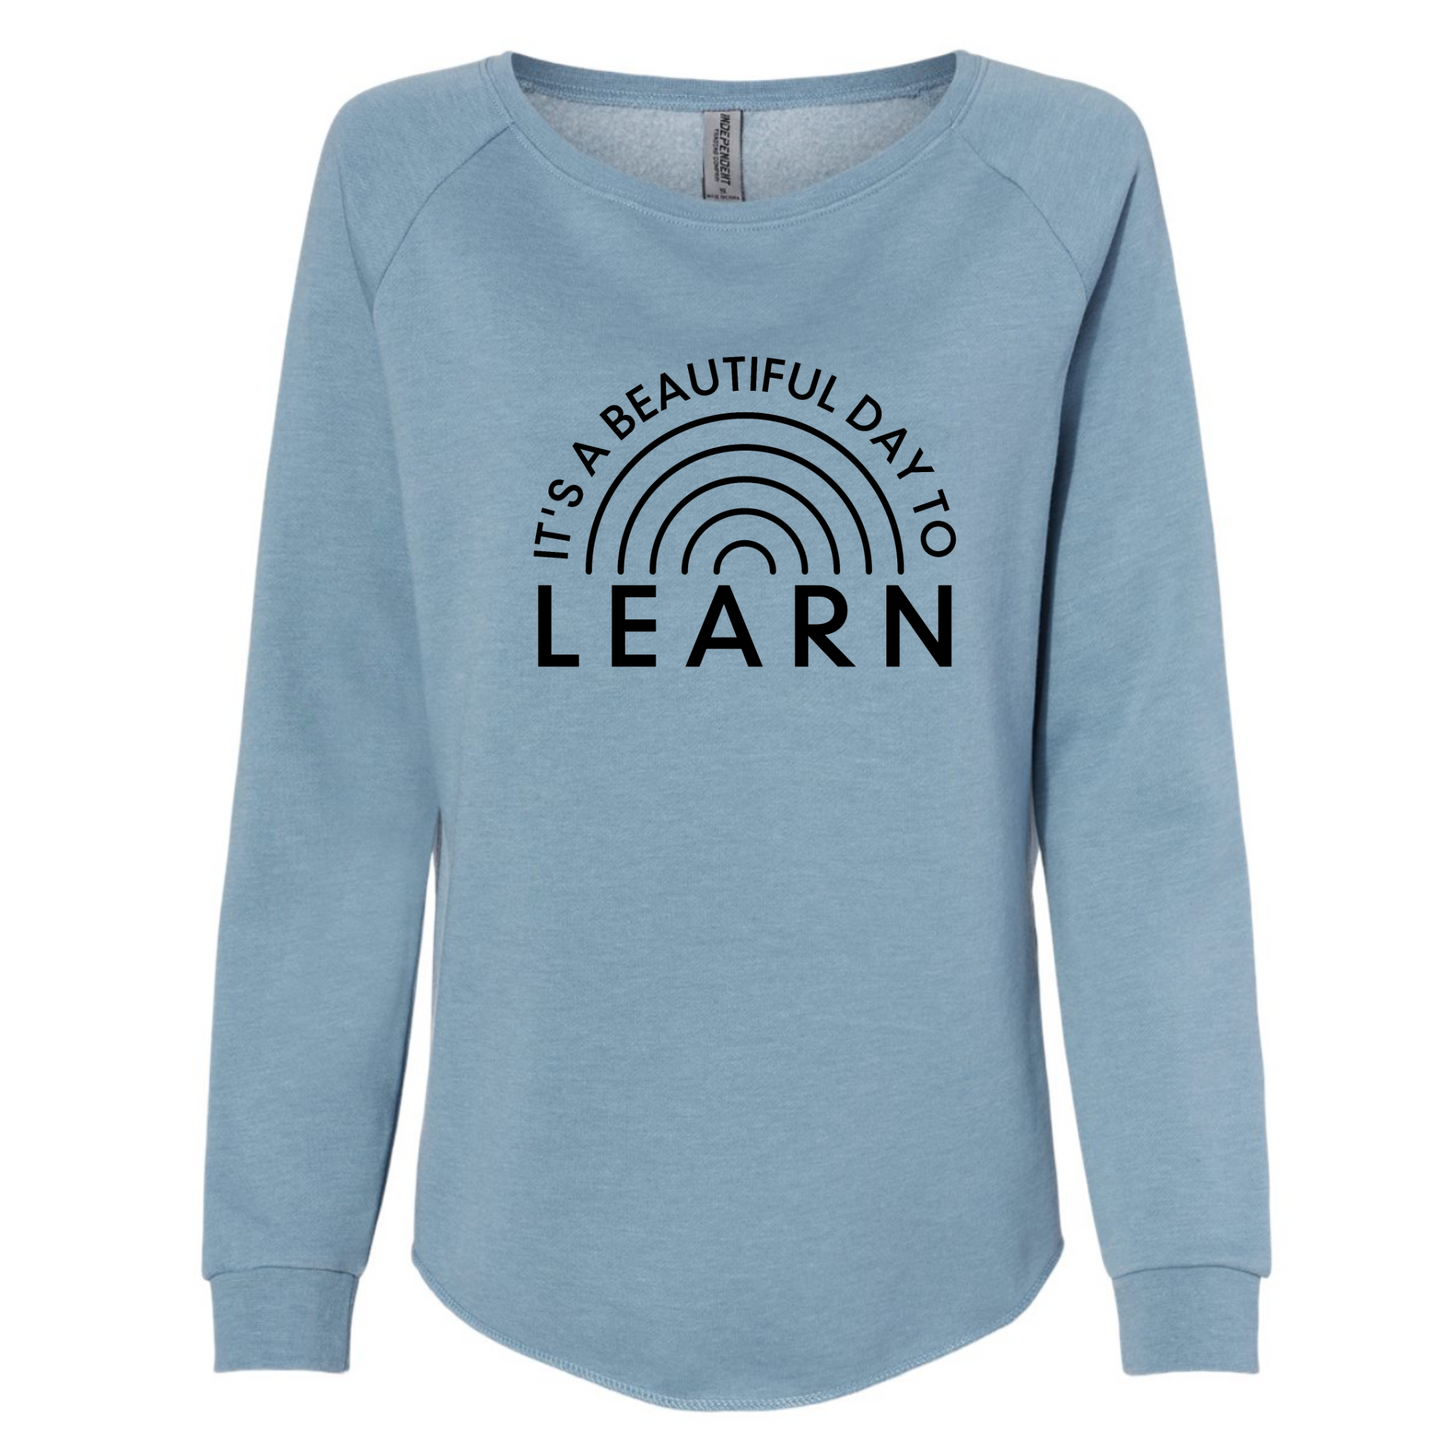 It's A Beautiful Day To Learn Crewneck Sweatshirt in blue - front view.